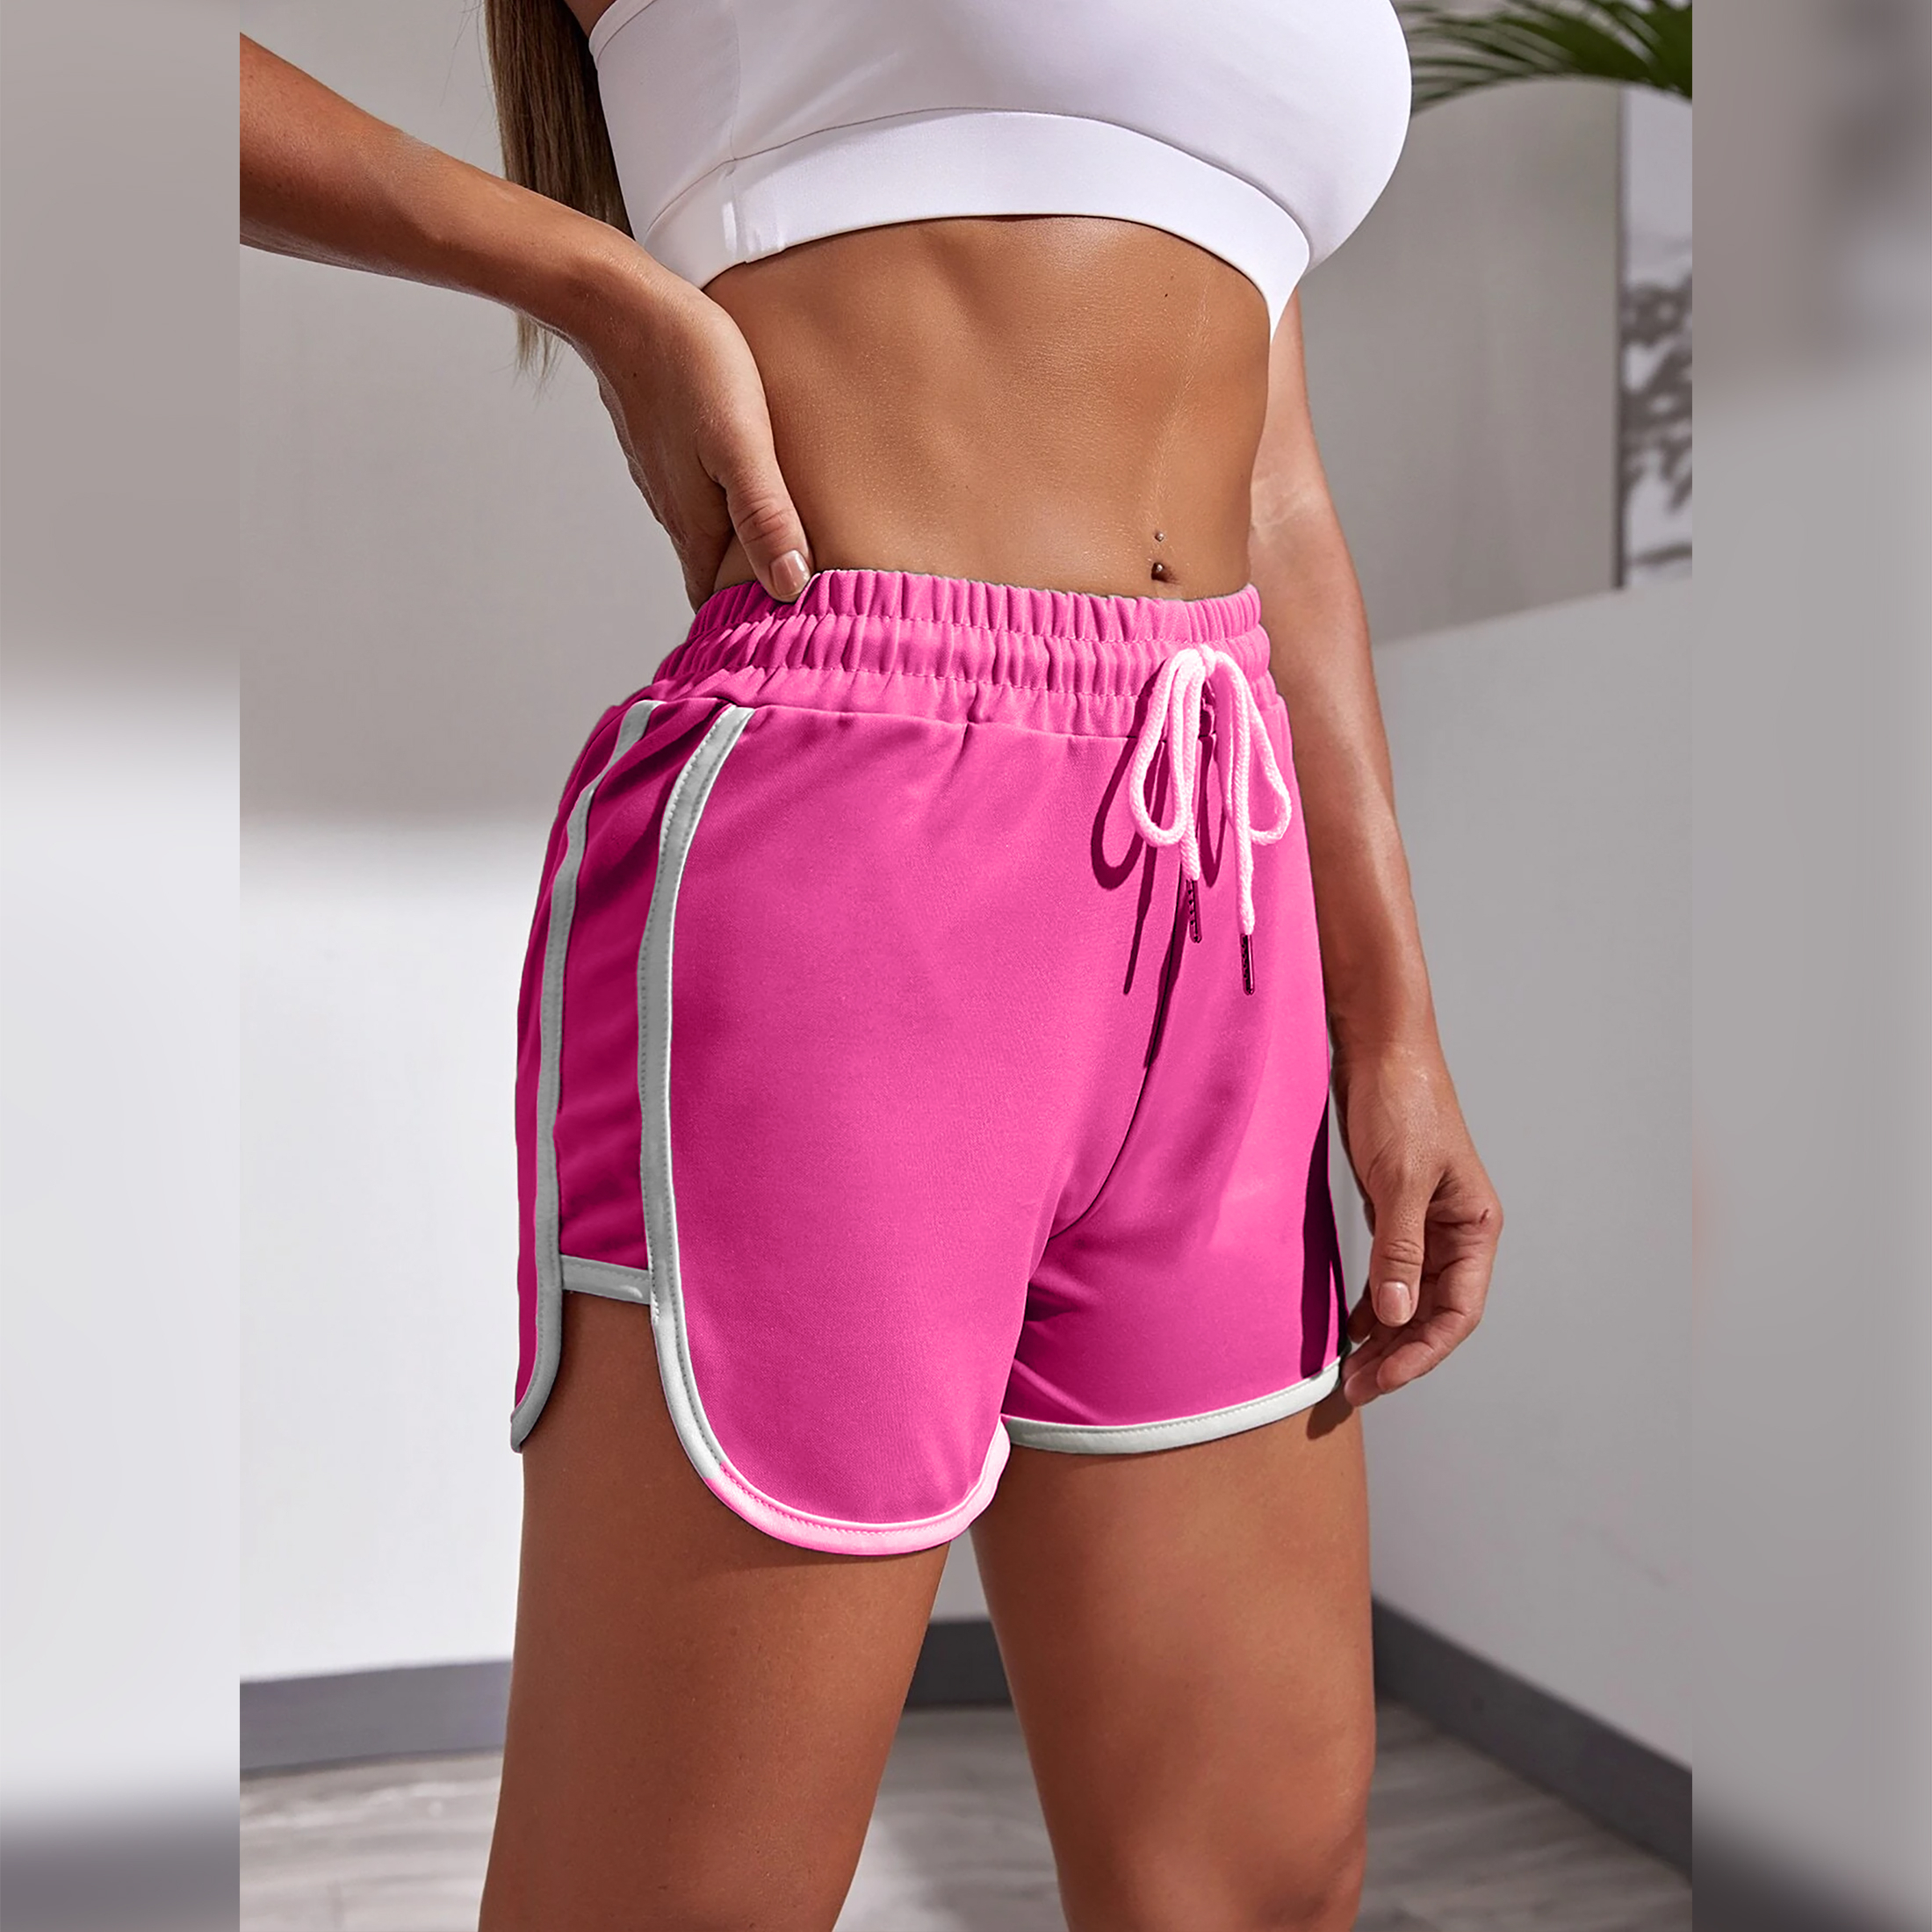 3-Pack Women's Dolphin Shorts Soft Comfy Elastic Waist Running Athletic Workout Yoga Pants - L